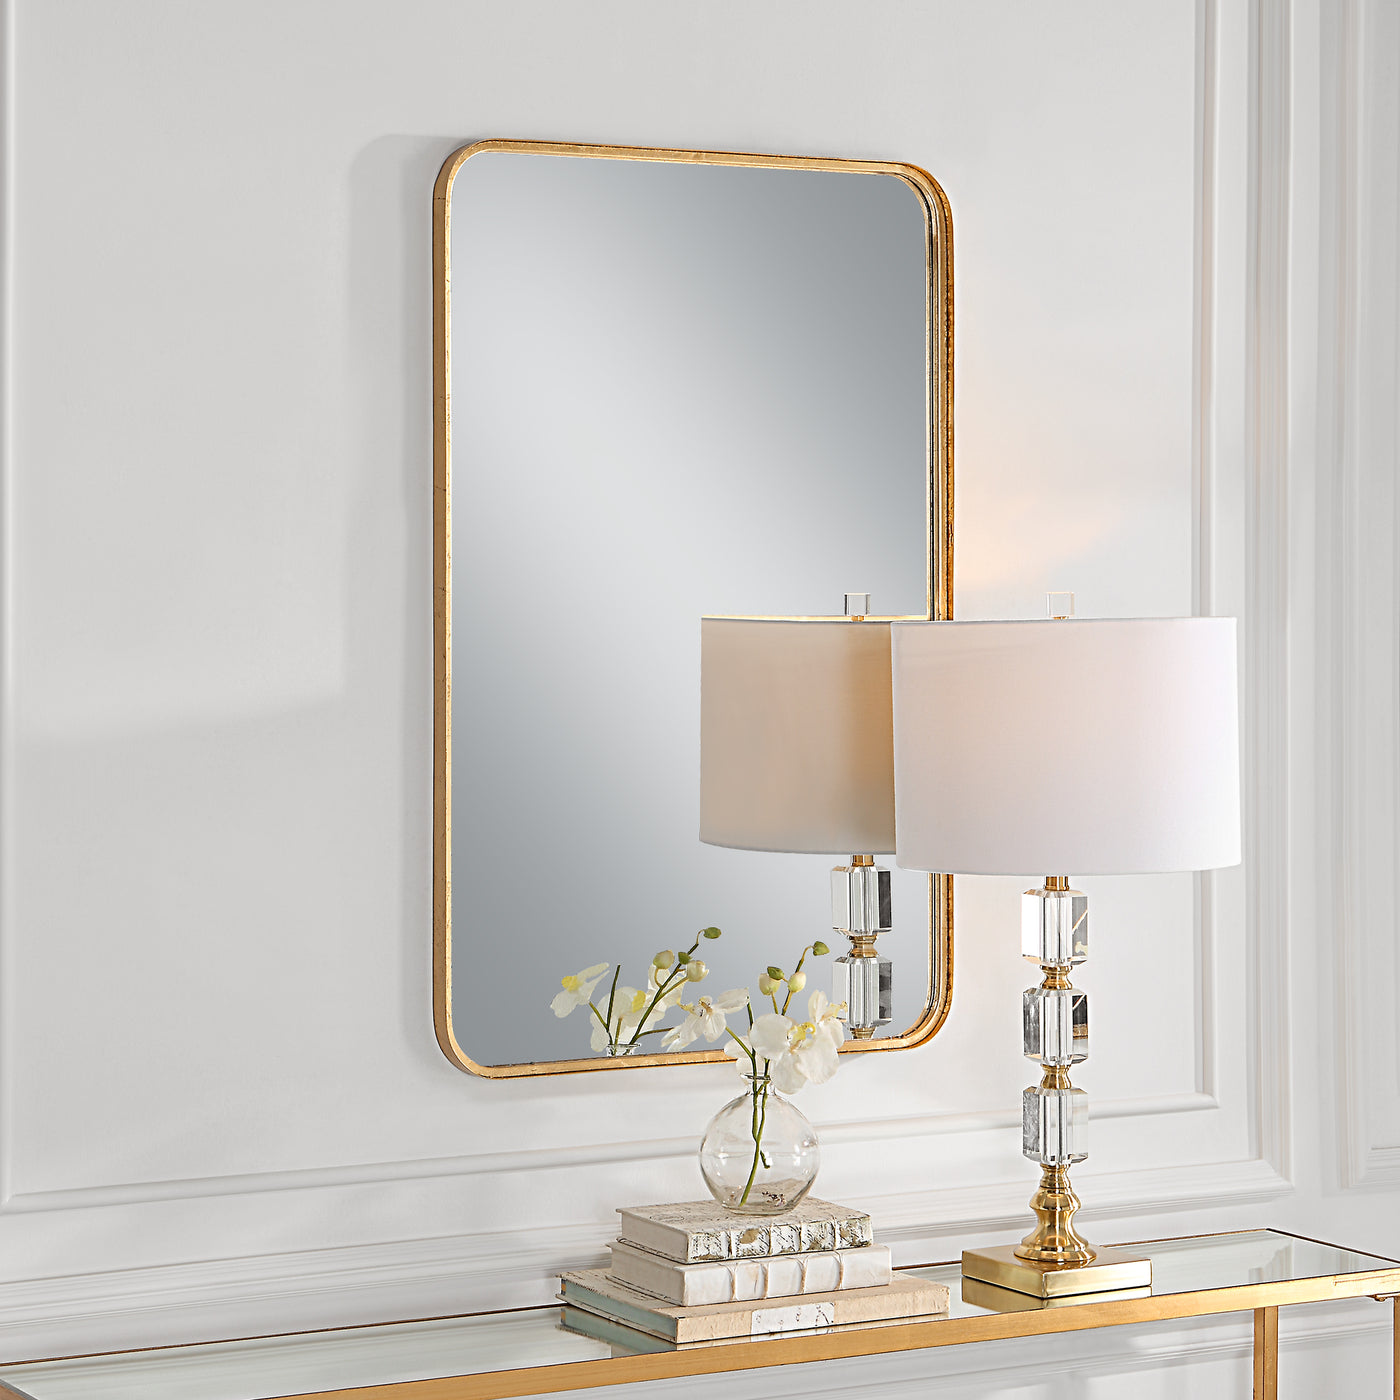 The Natchez - Rectangular Gold Framed Vanity Mirror with Rounded Corners